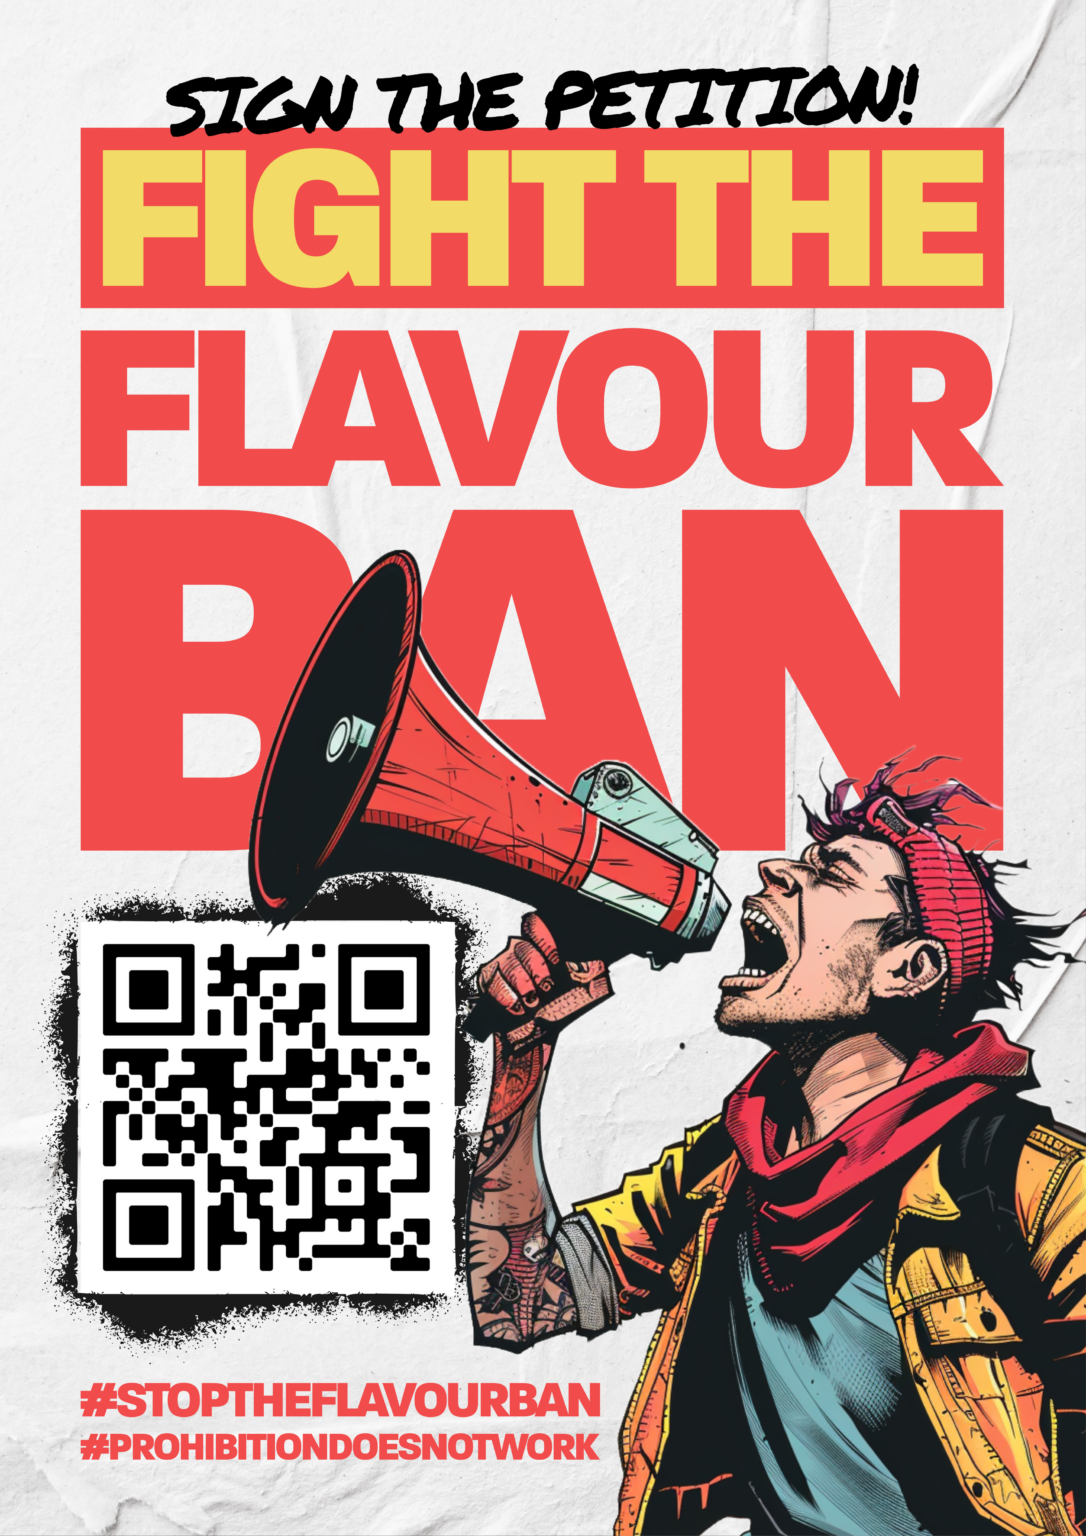 Fight the flavour ban sign the petition graphic